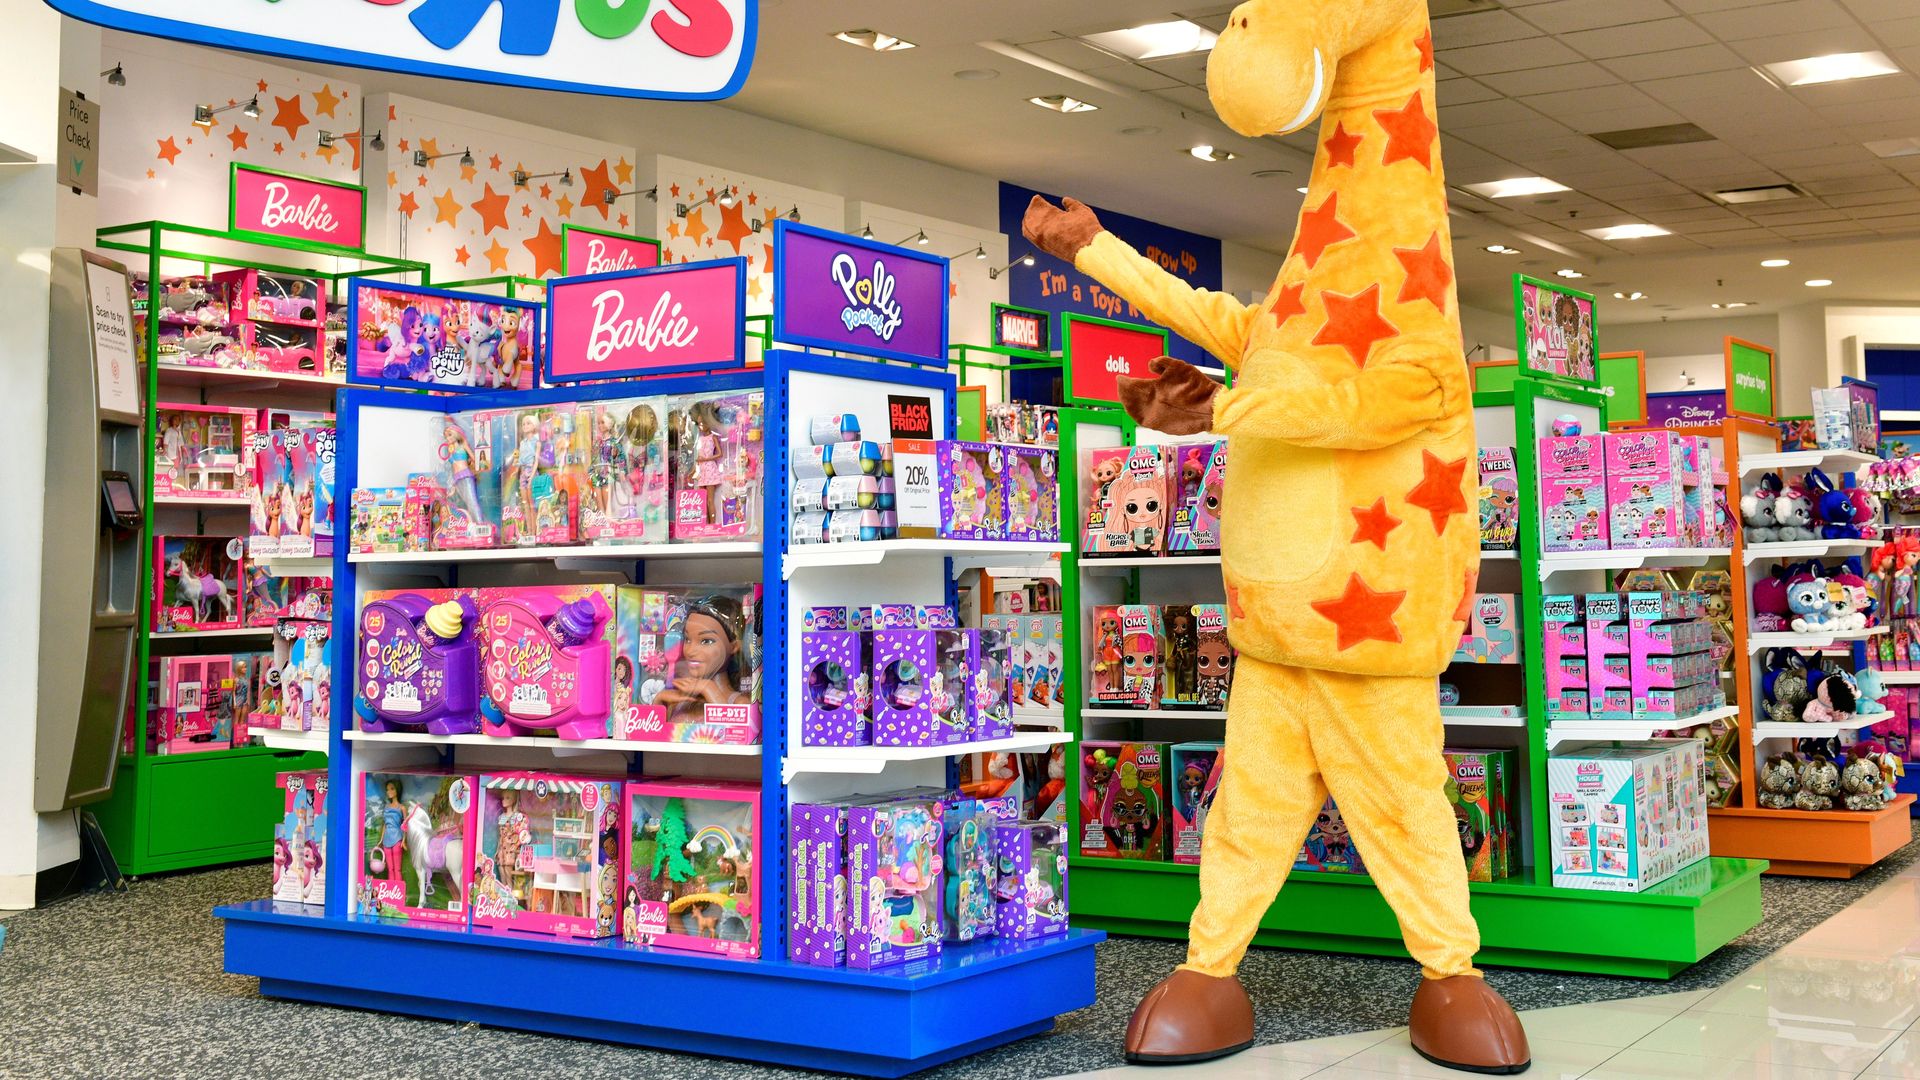 Macy's Toys R Us store.